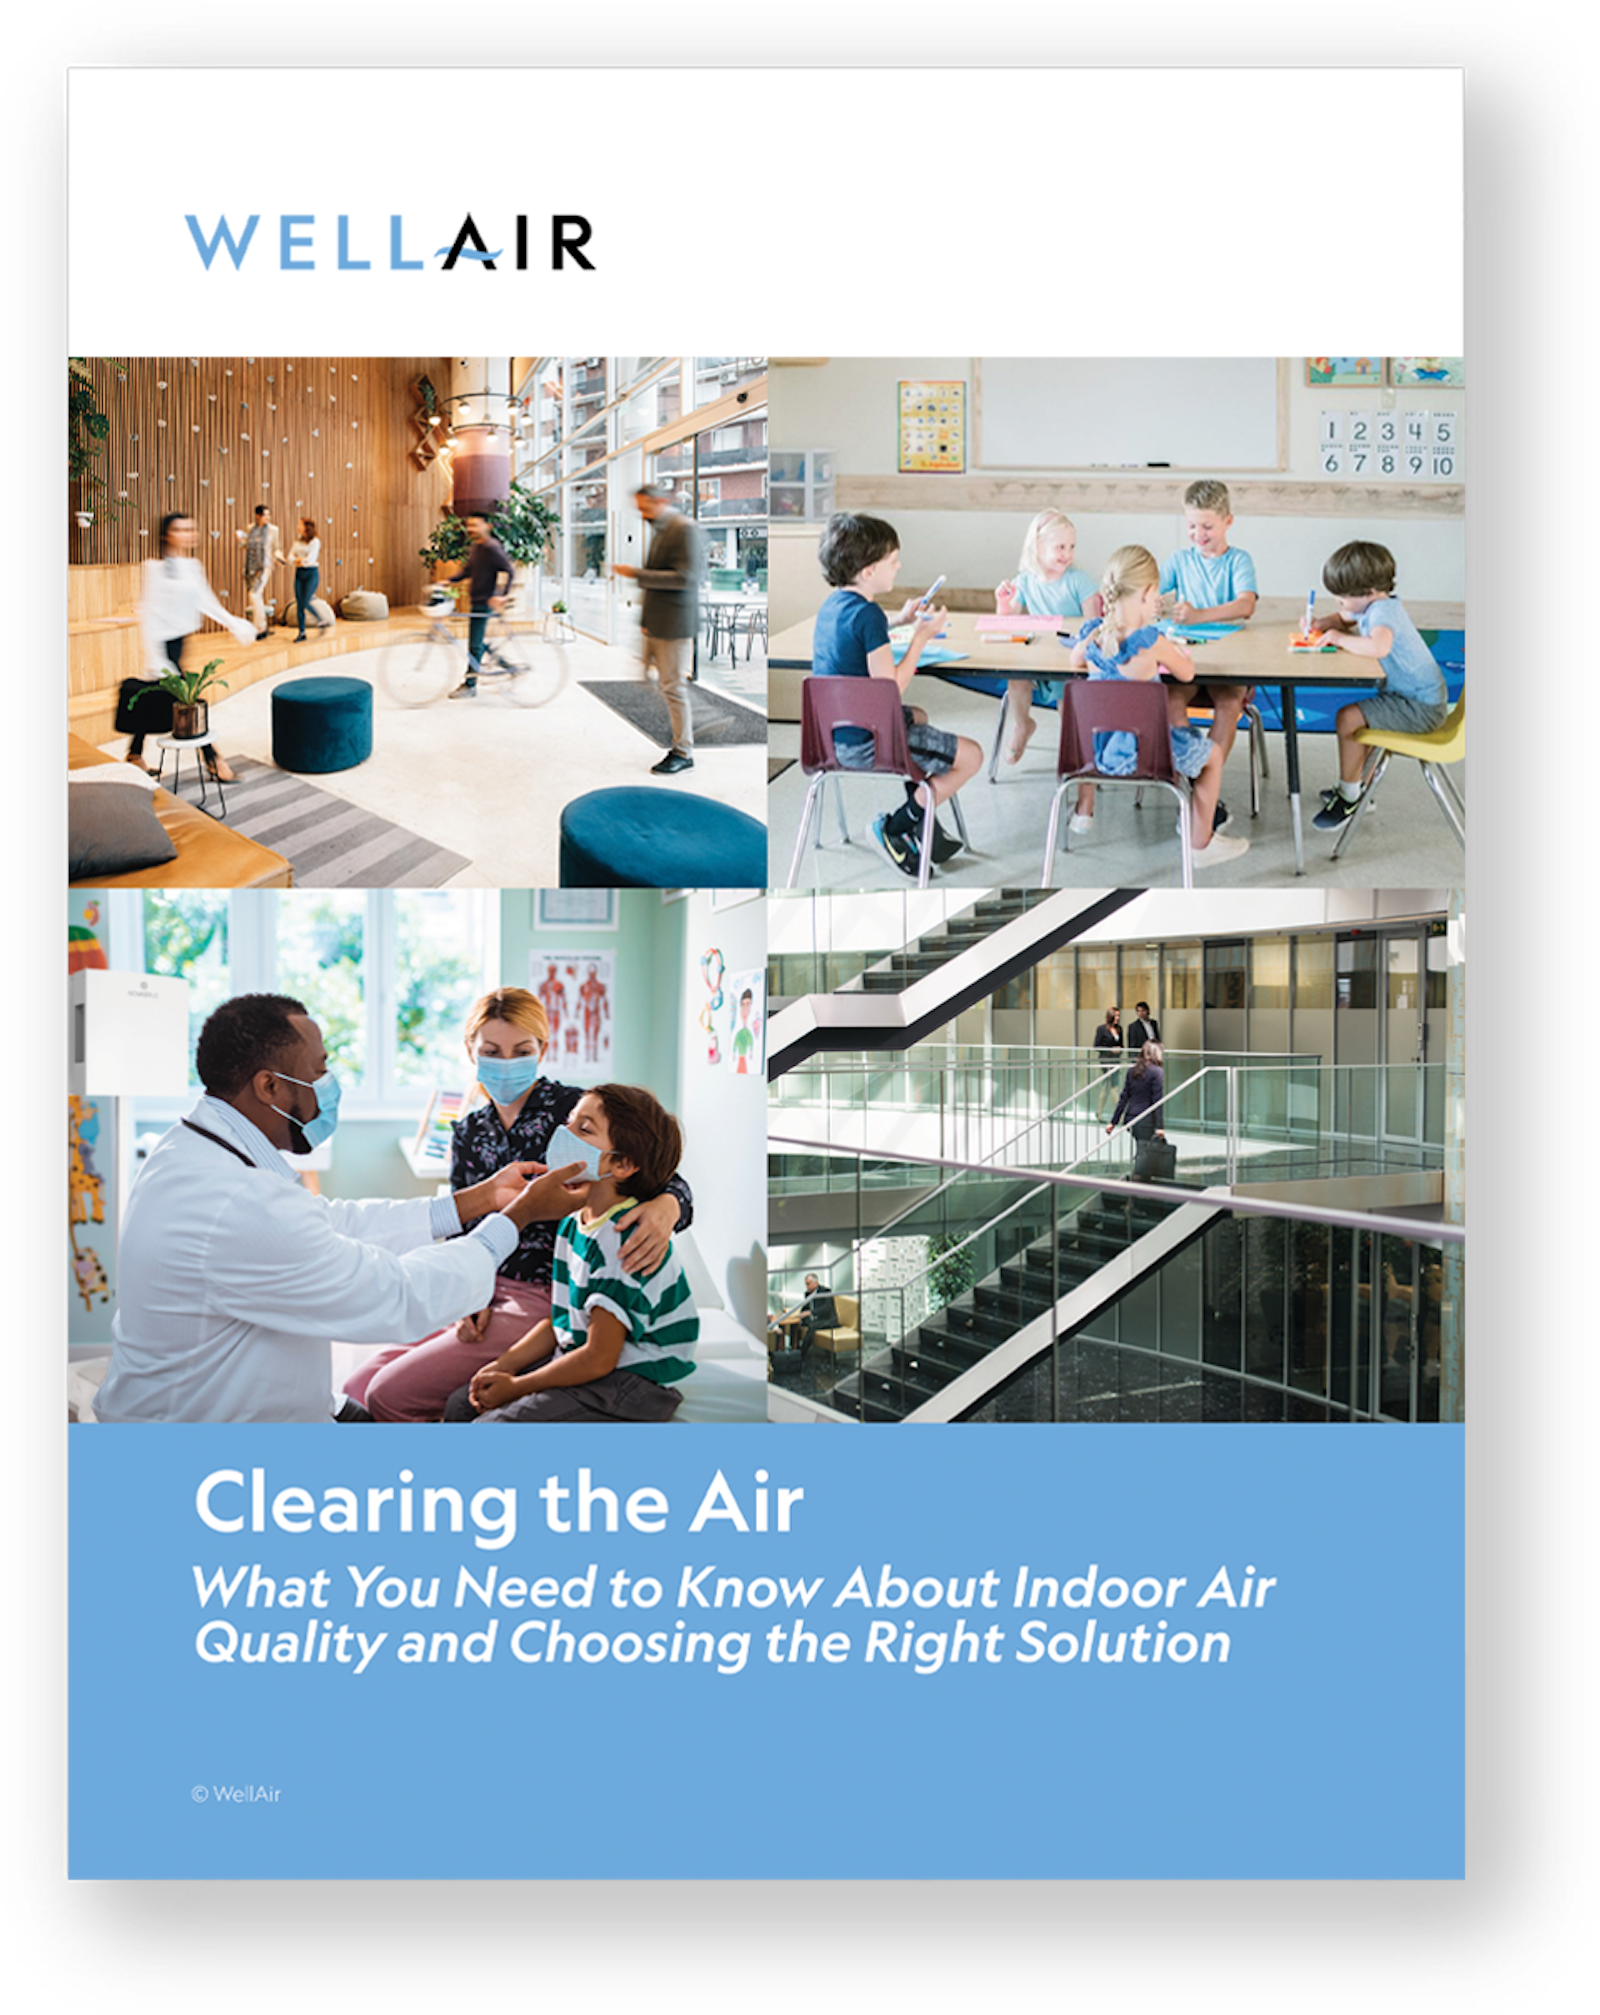 https://www.datocms-assets.com/50071/1643156448-clearing-the-air-wp-cover-hires1.png?w=1600